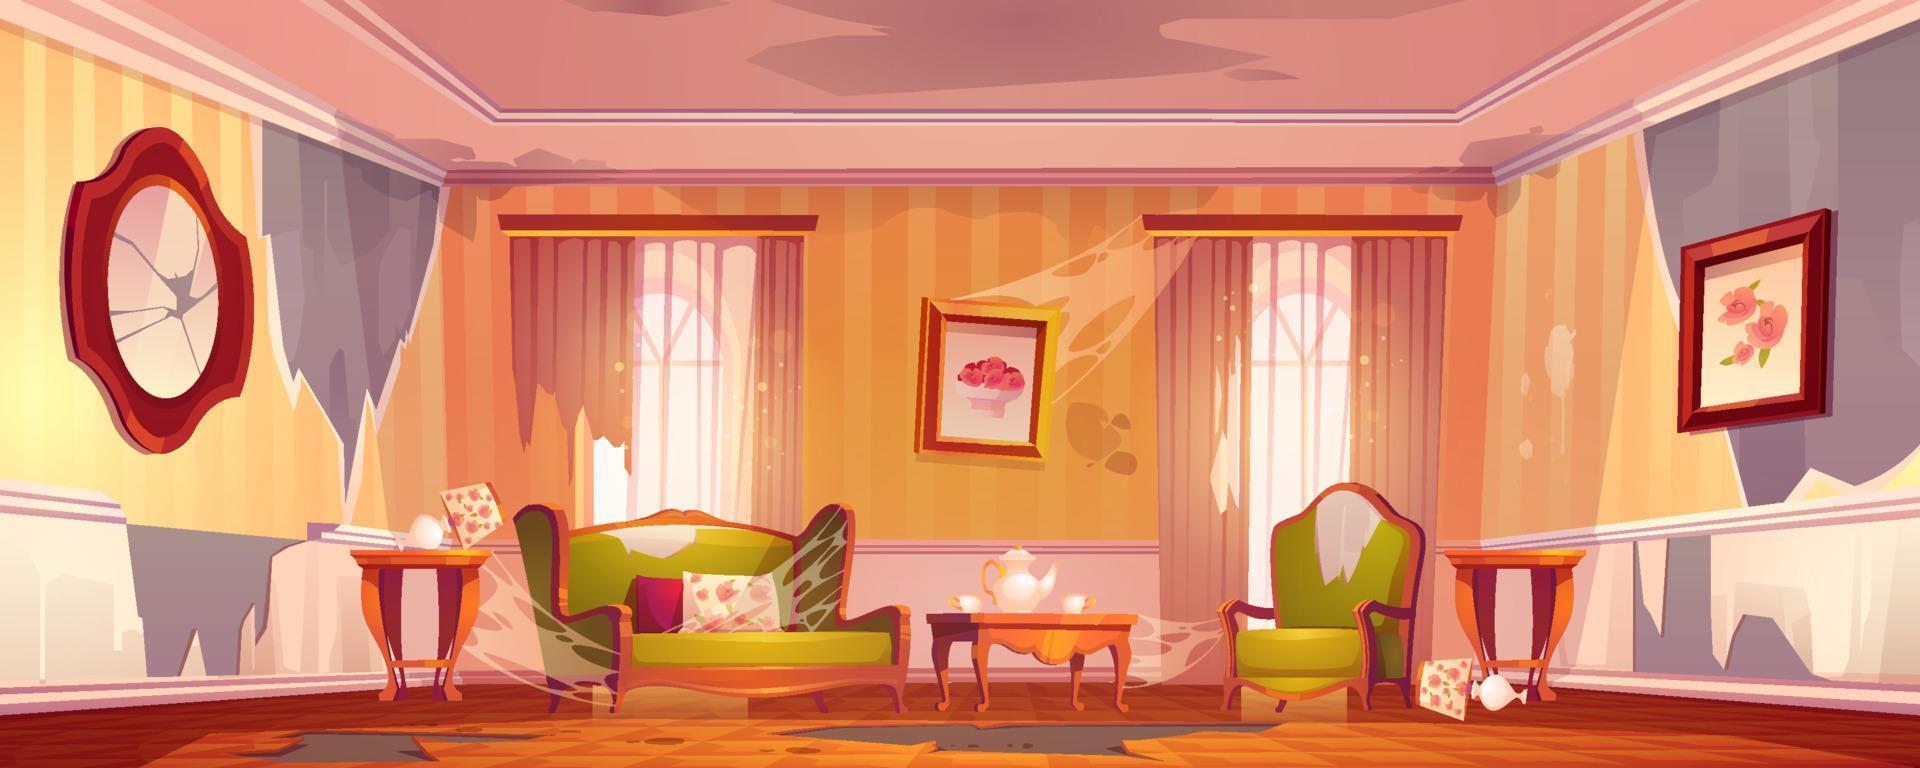 Old dirty living room in victorian style vector